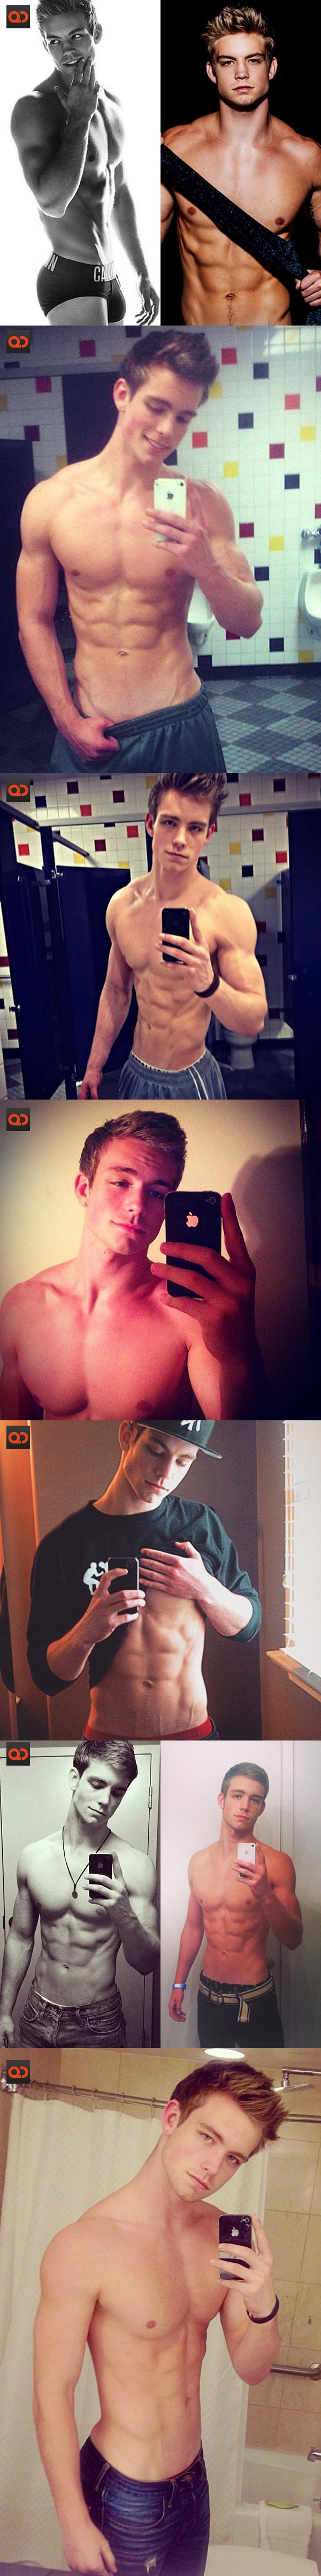 qc-exposed-cock_dustin_mcneer_from_antm-collage02